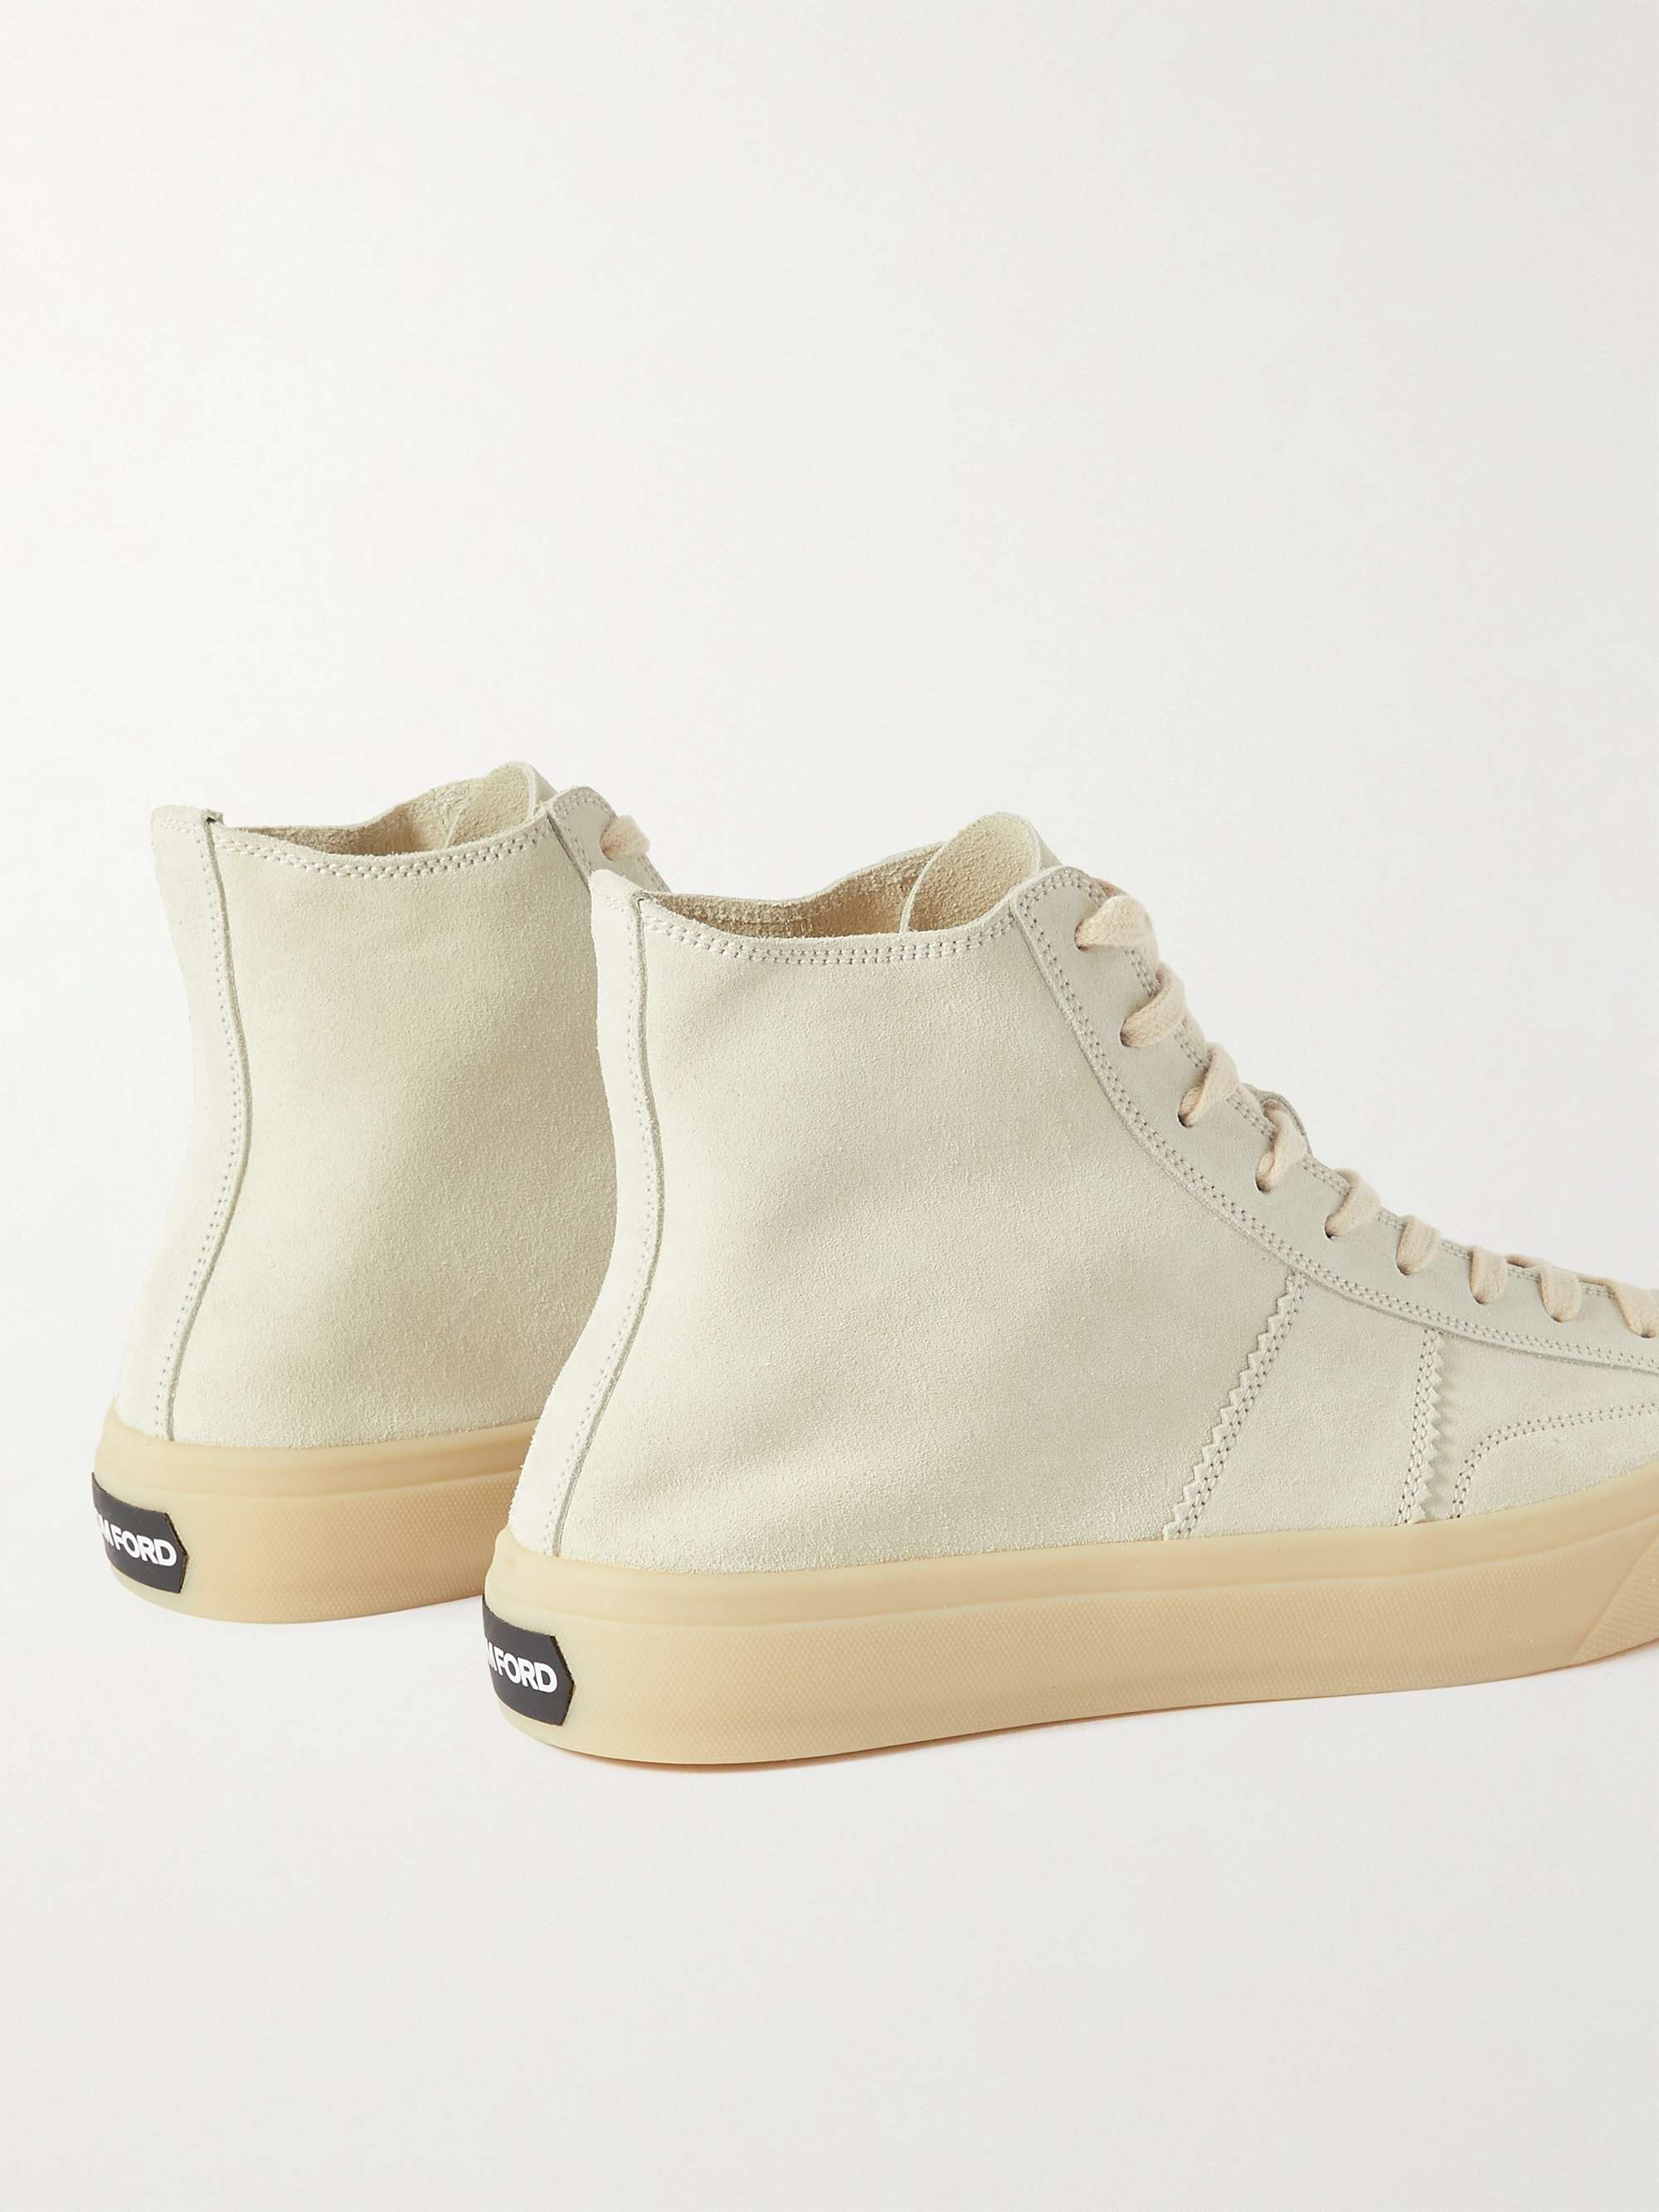 TOM FORD Cambridge Suede High-Top Sneakers